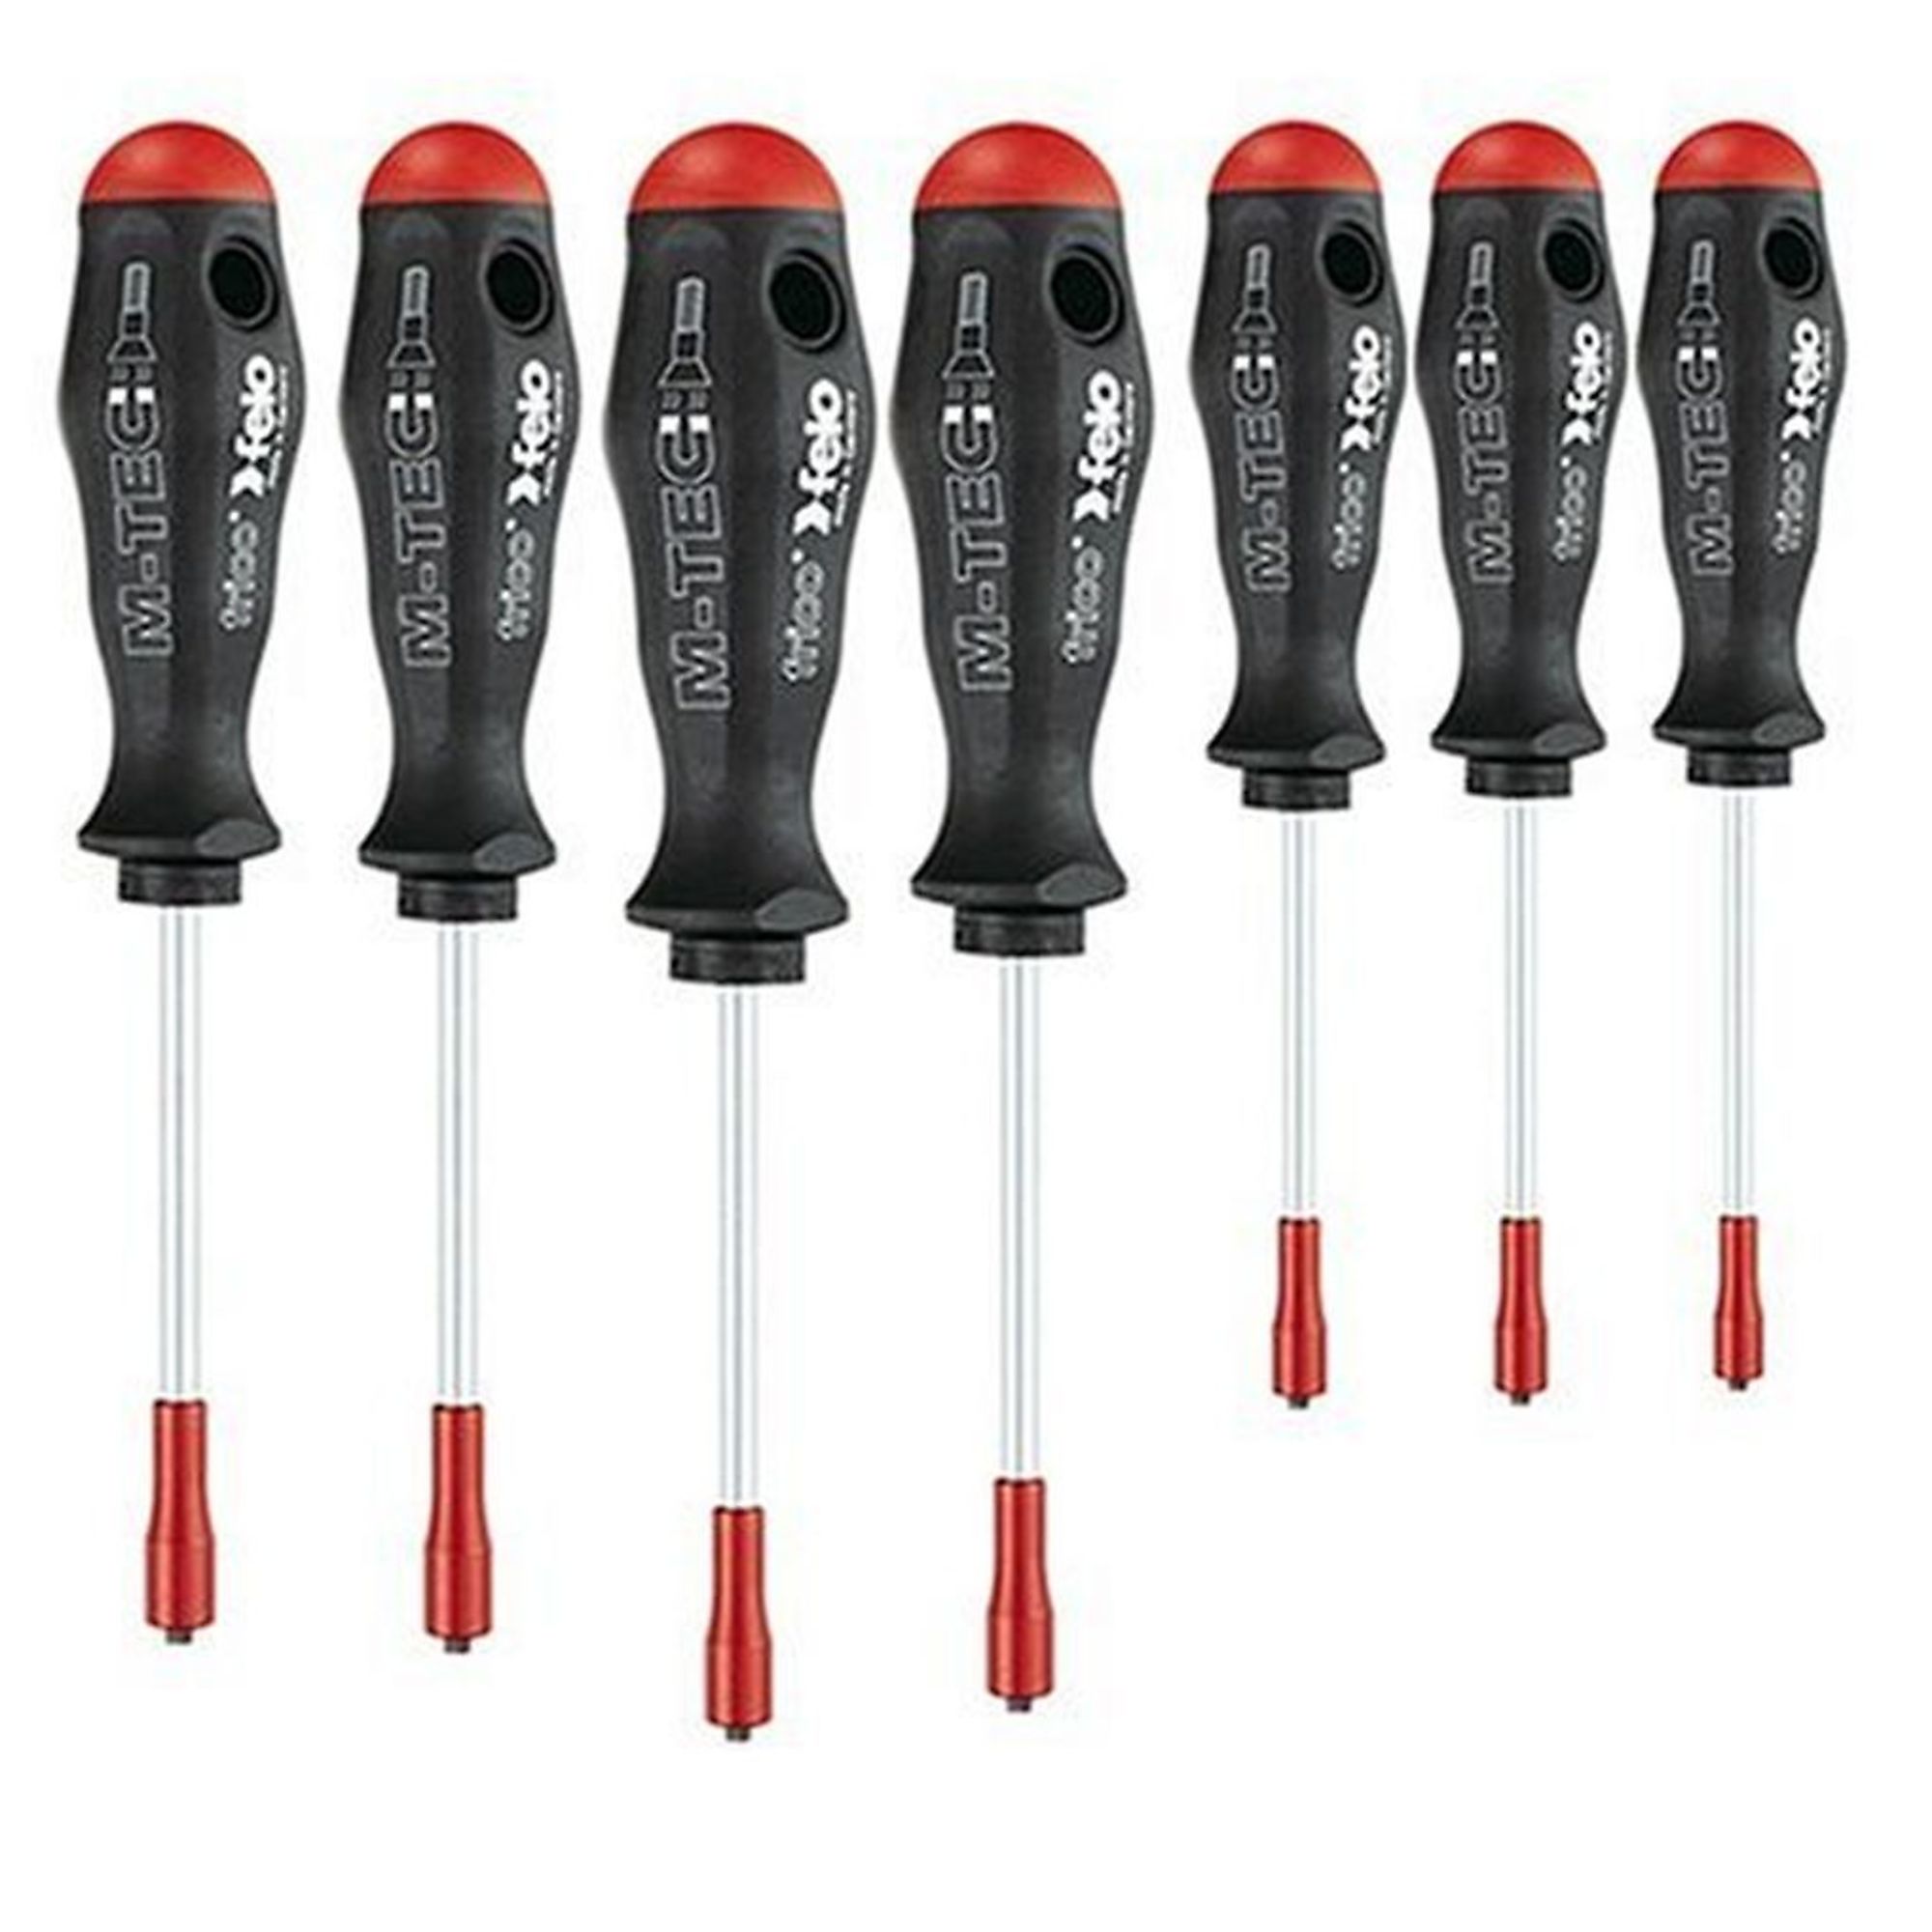 Felo, Torx, Slotted, Phillips Screwdriver, 7 Piece, Drive Type Slotted,  Model# 0715751699